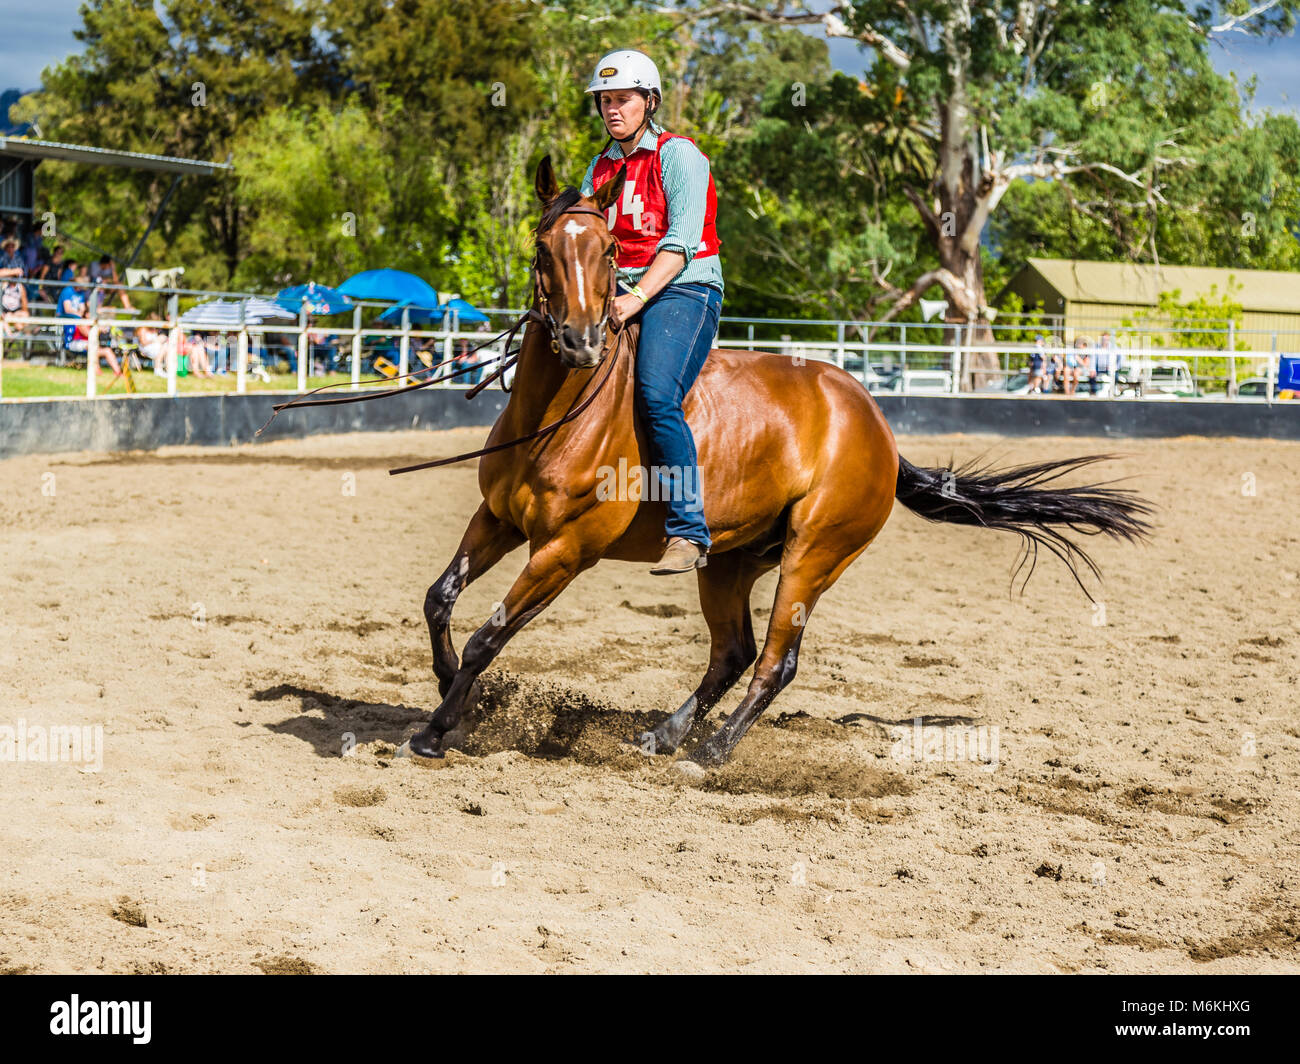 Rider pivots her horse in the King of the Ranges Bareback Freestyle Competition in Murrurundi, NSW, Australia, February 24, 2018. Stock Photo